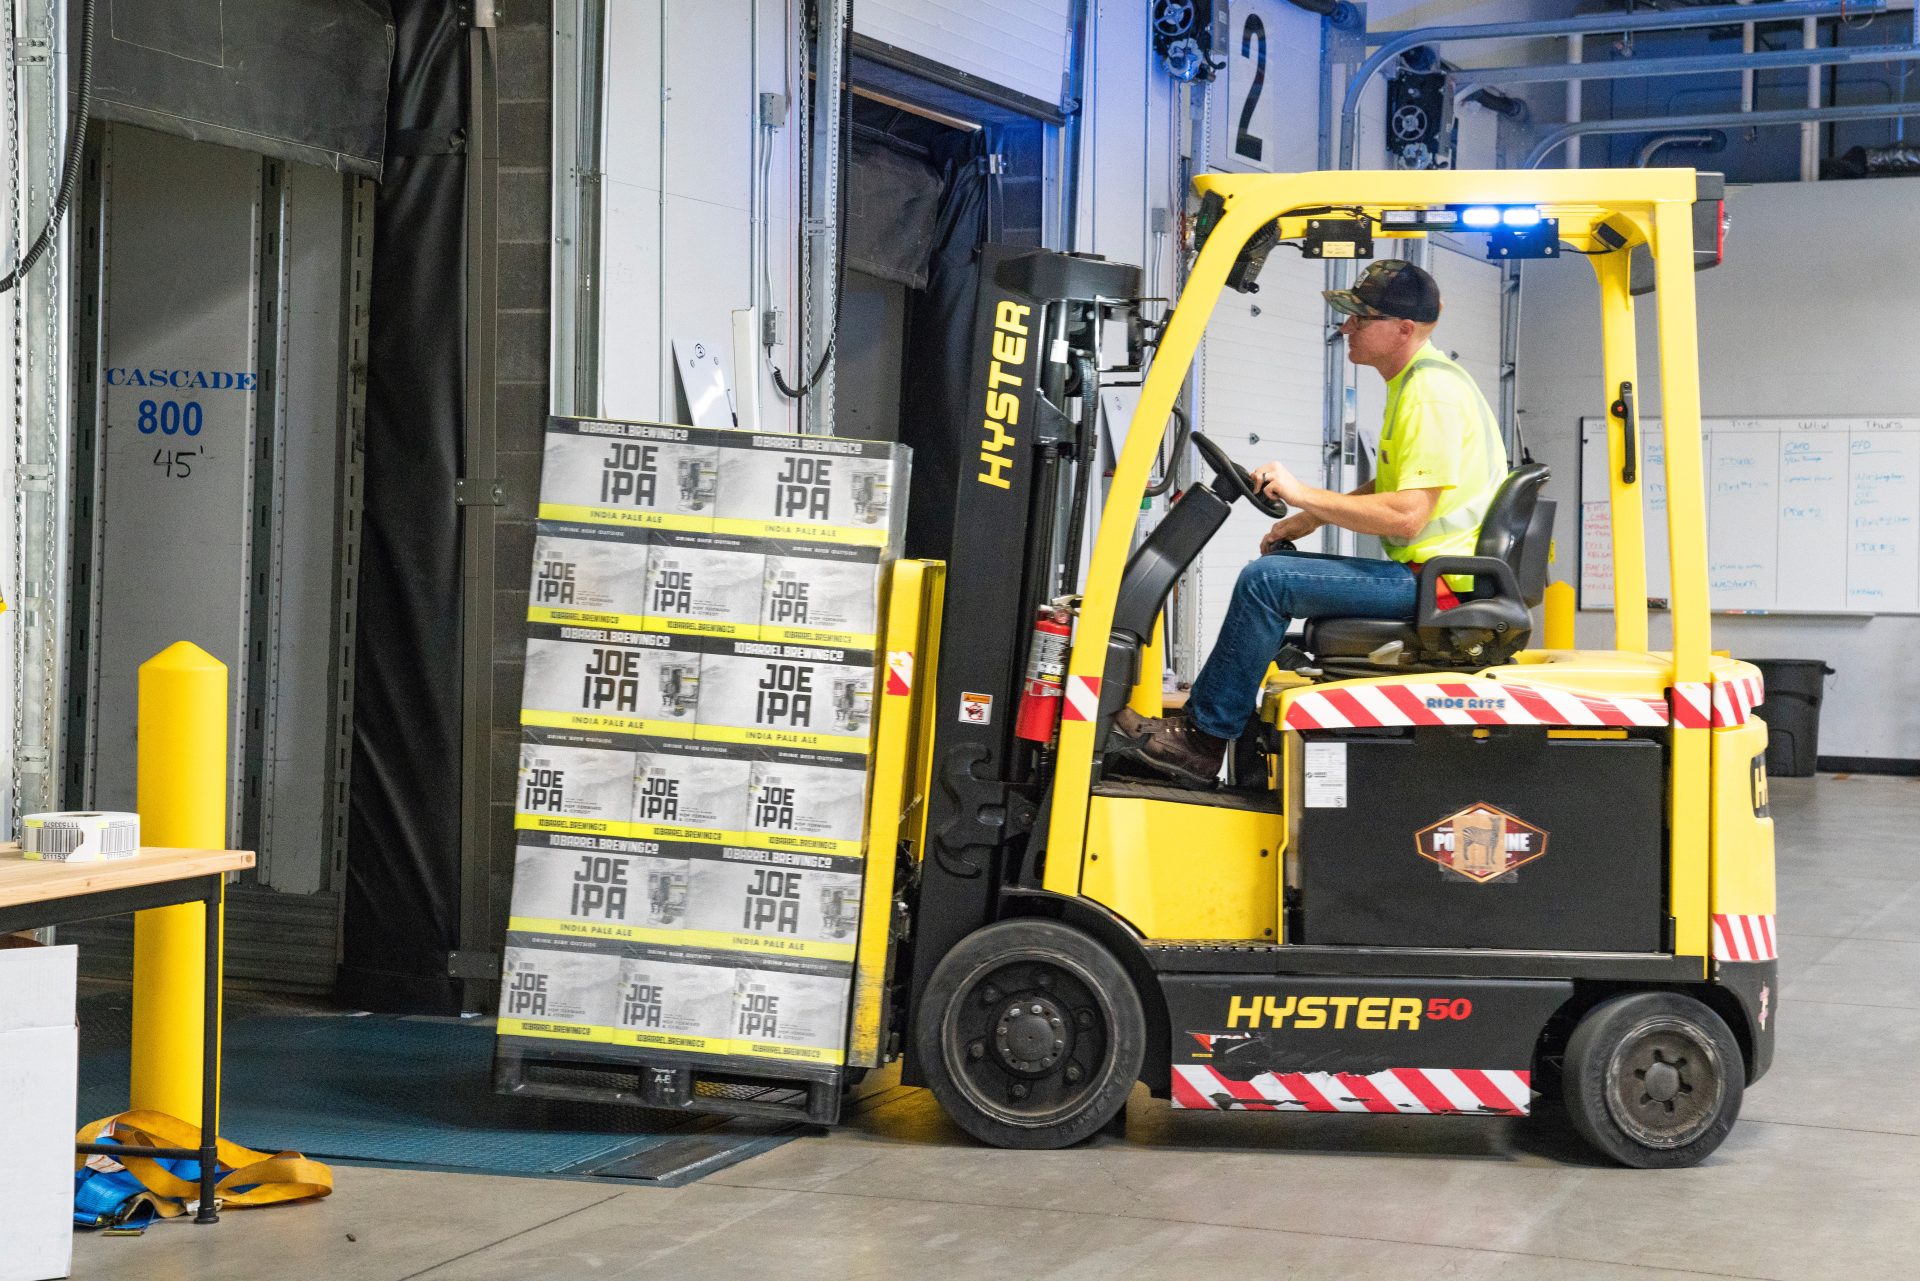 Using forklift in the workplace